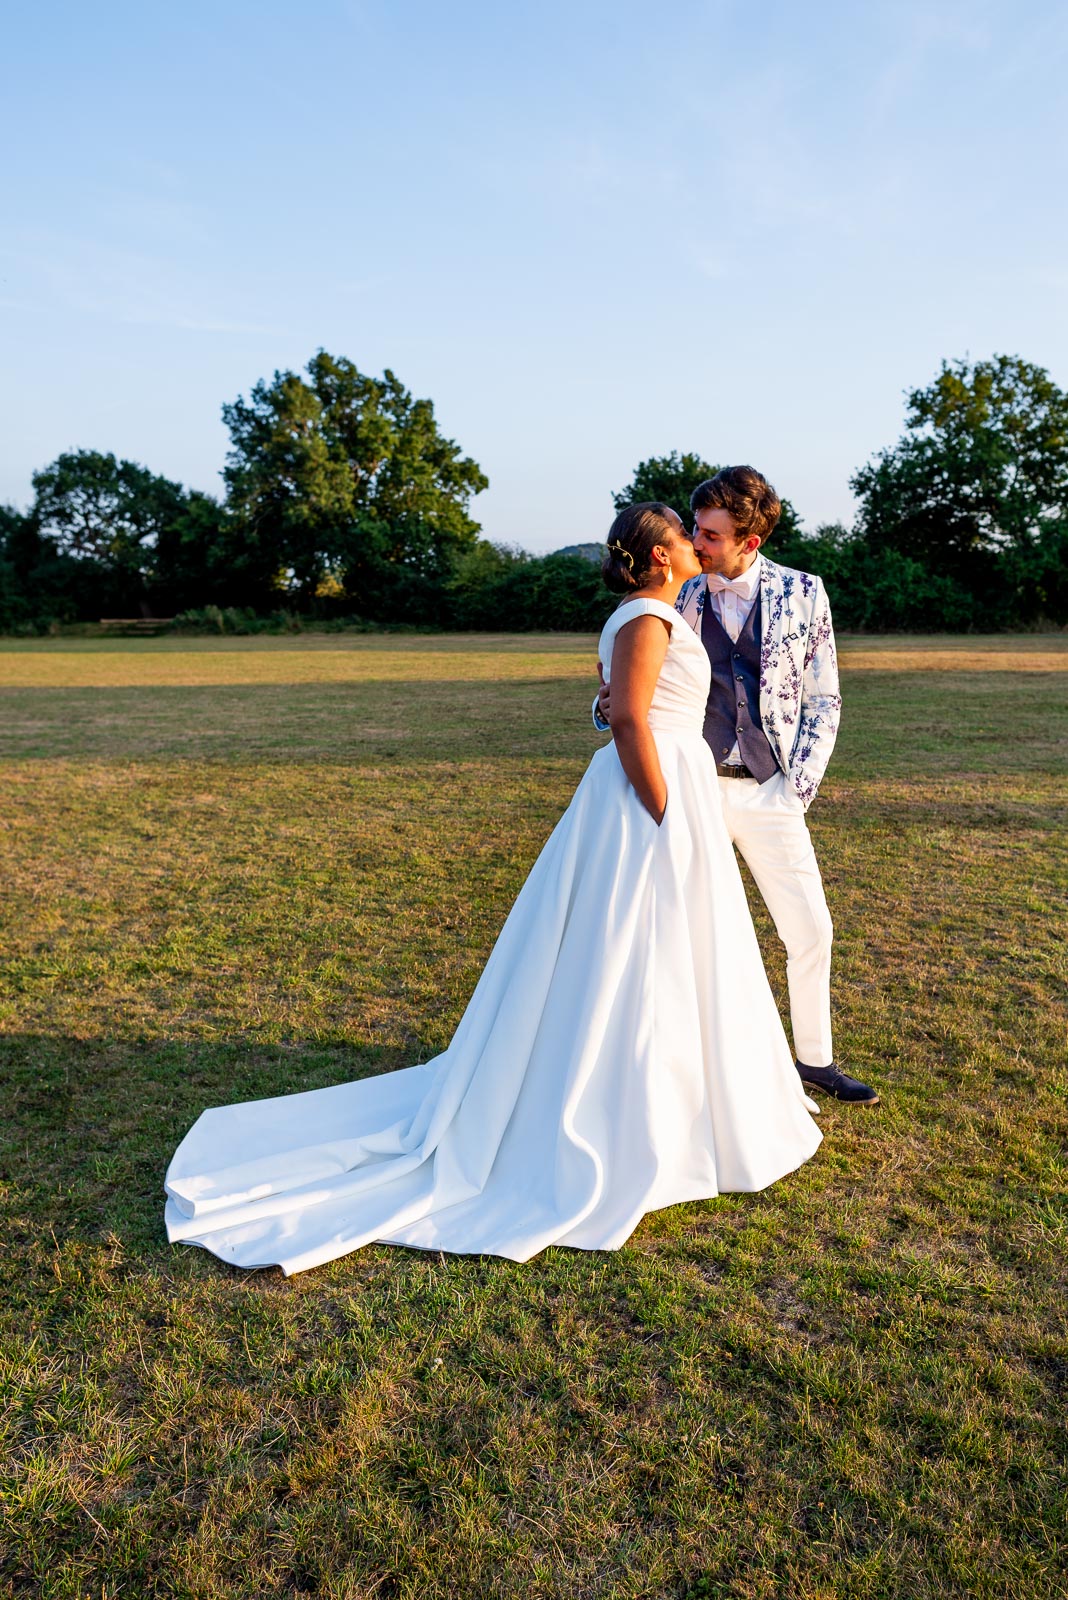 Wedding Photographer for Olivia and Edward at The Royal Oak in Lewes